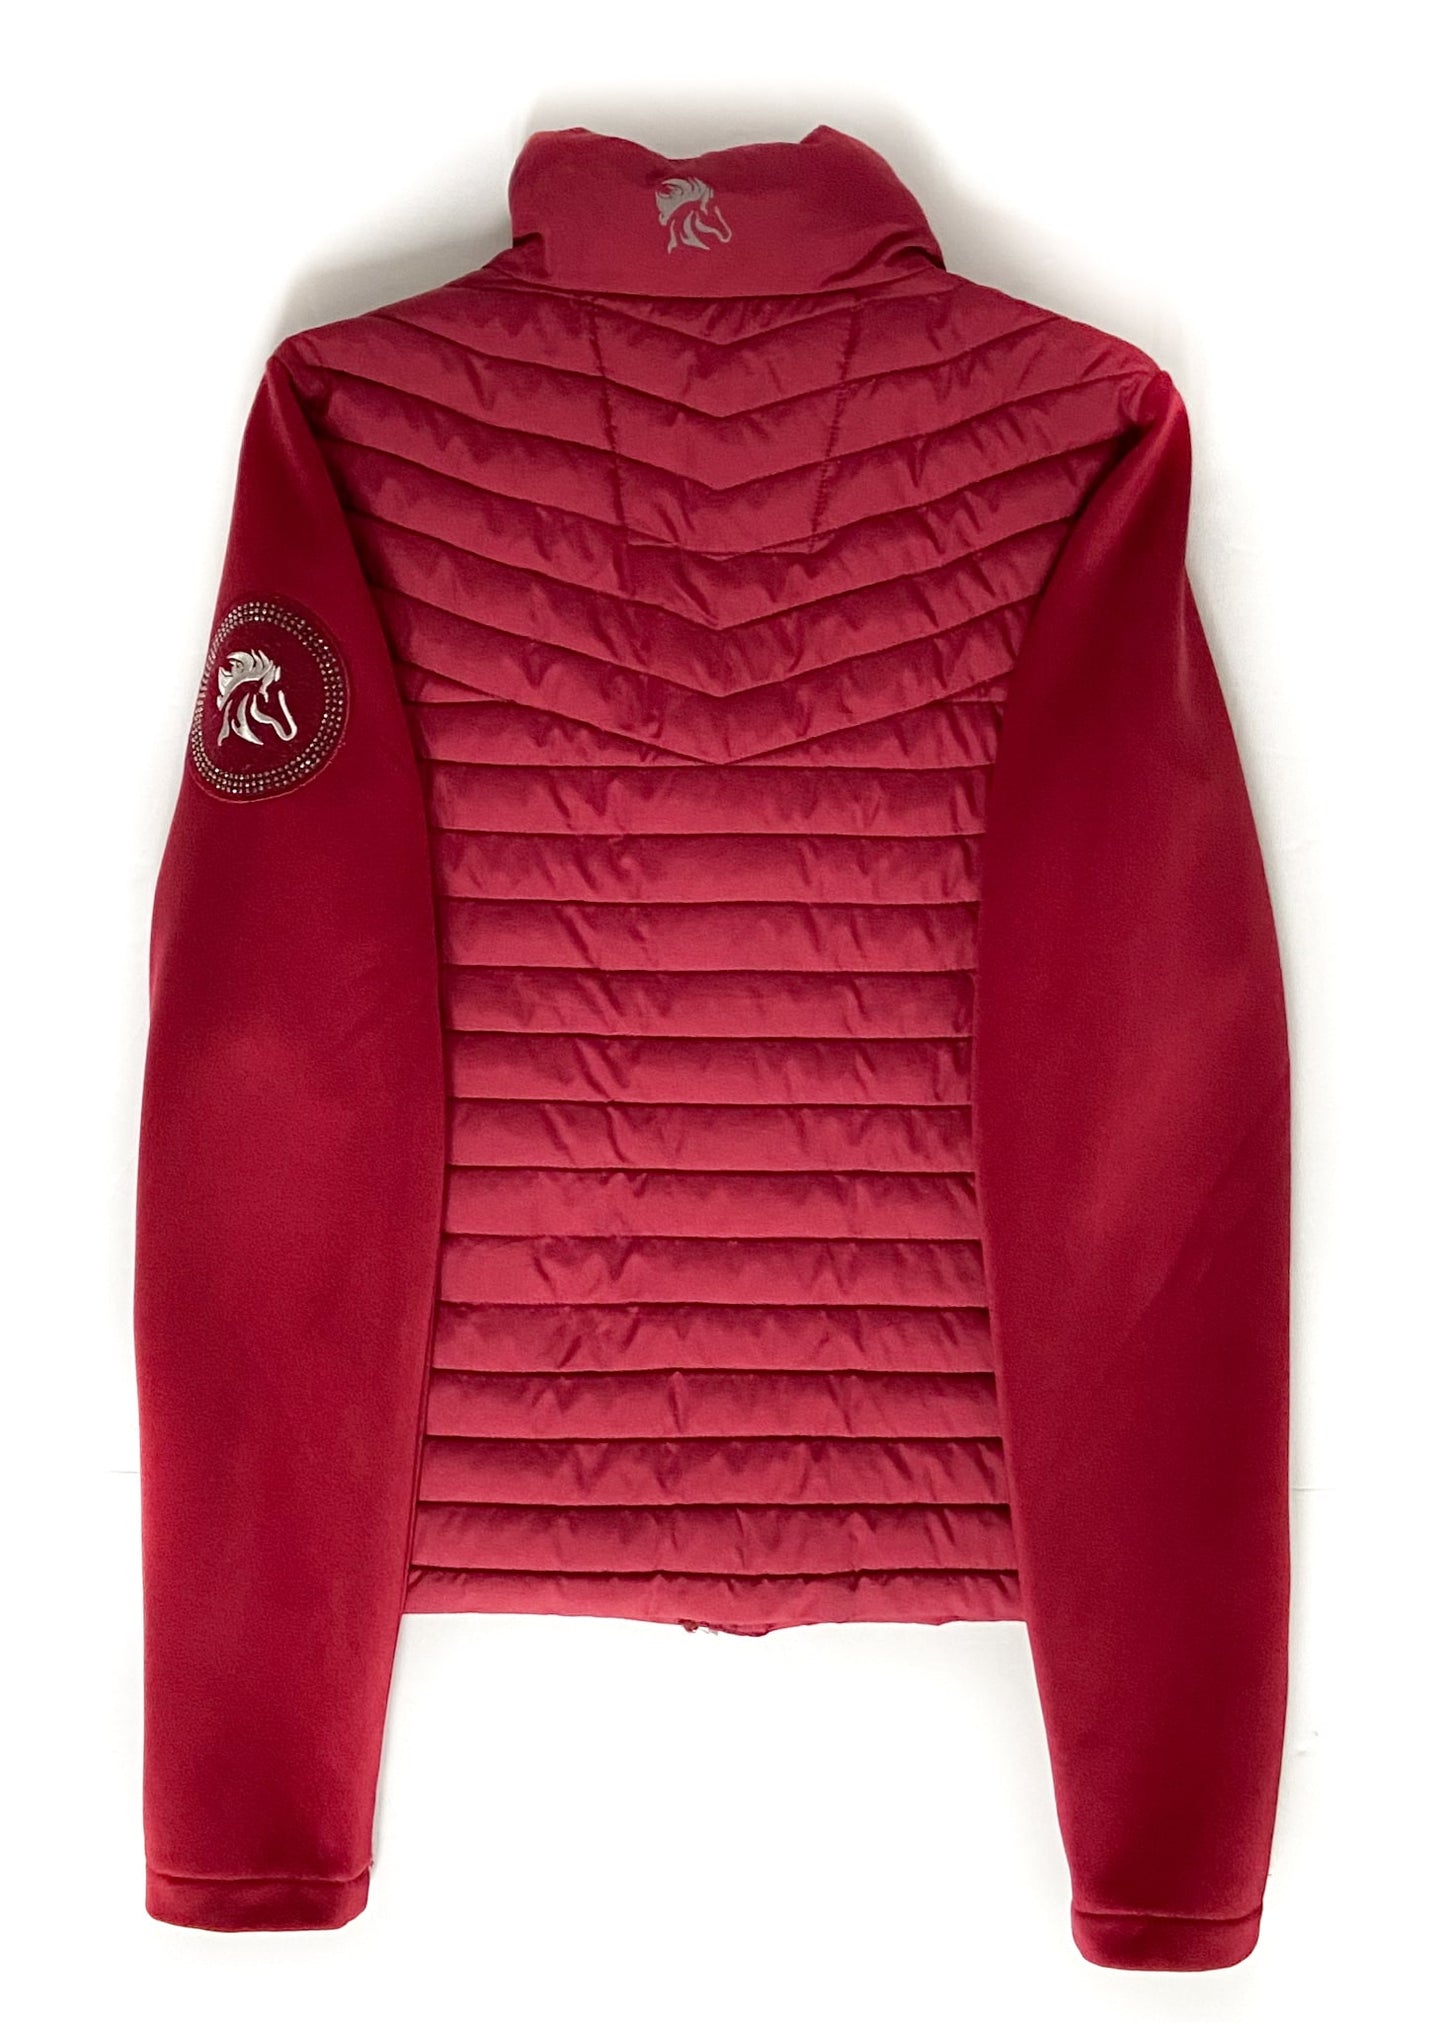 Tempo Equestrian Jacket - Red - Women's XS